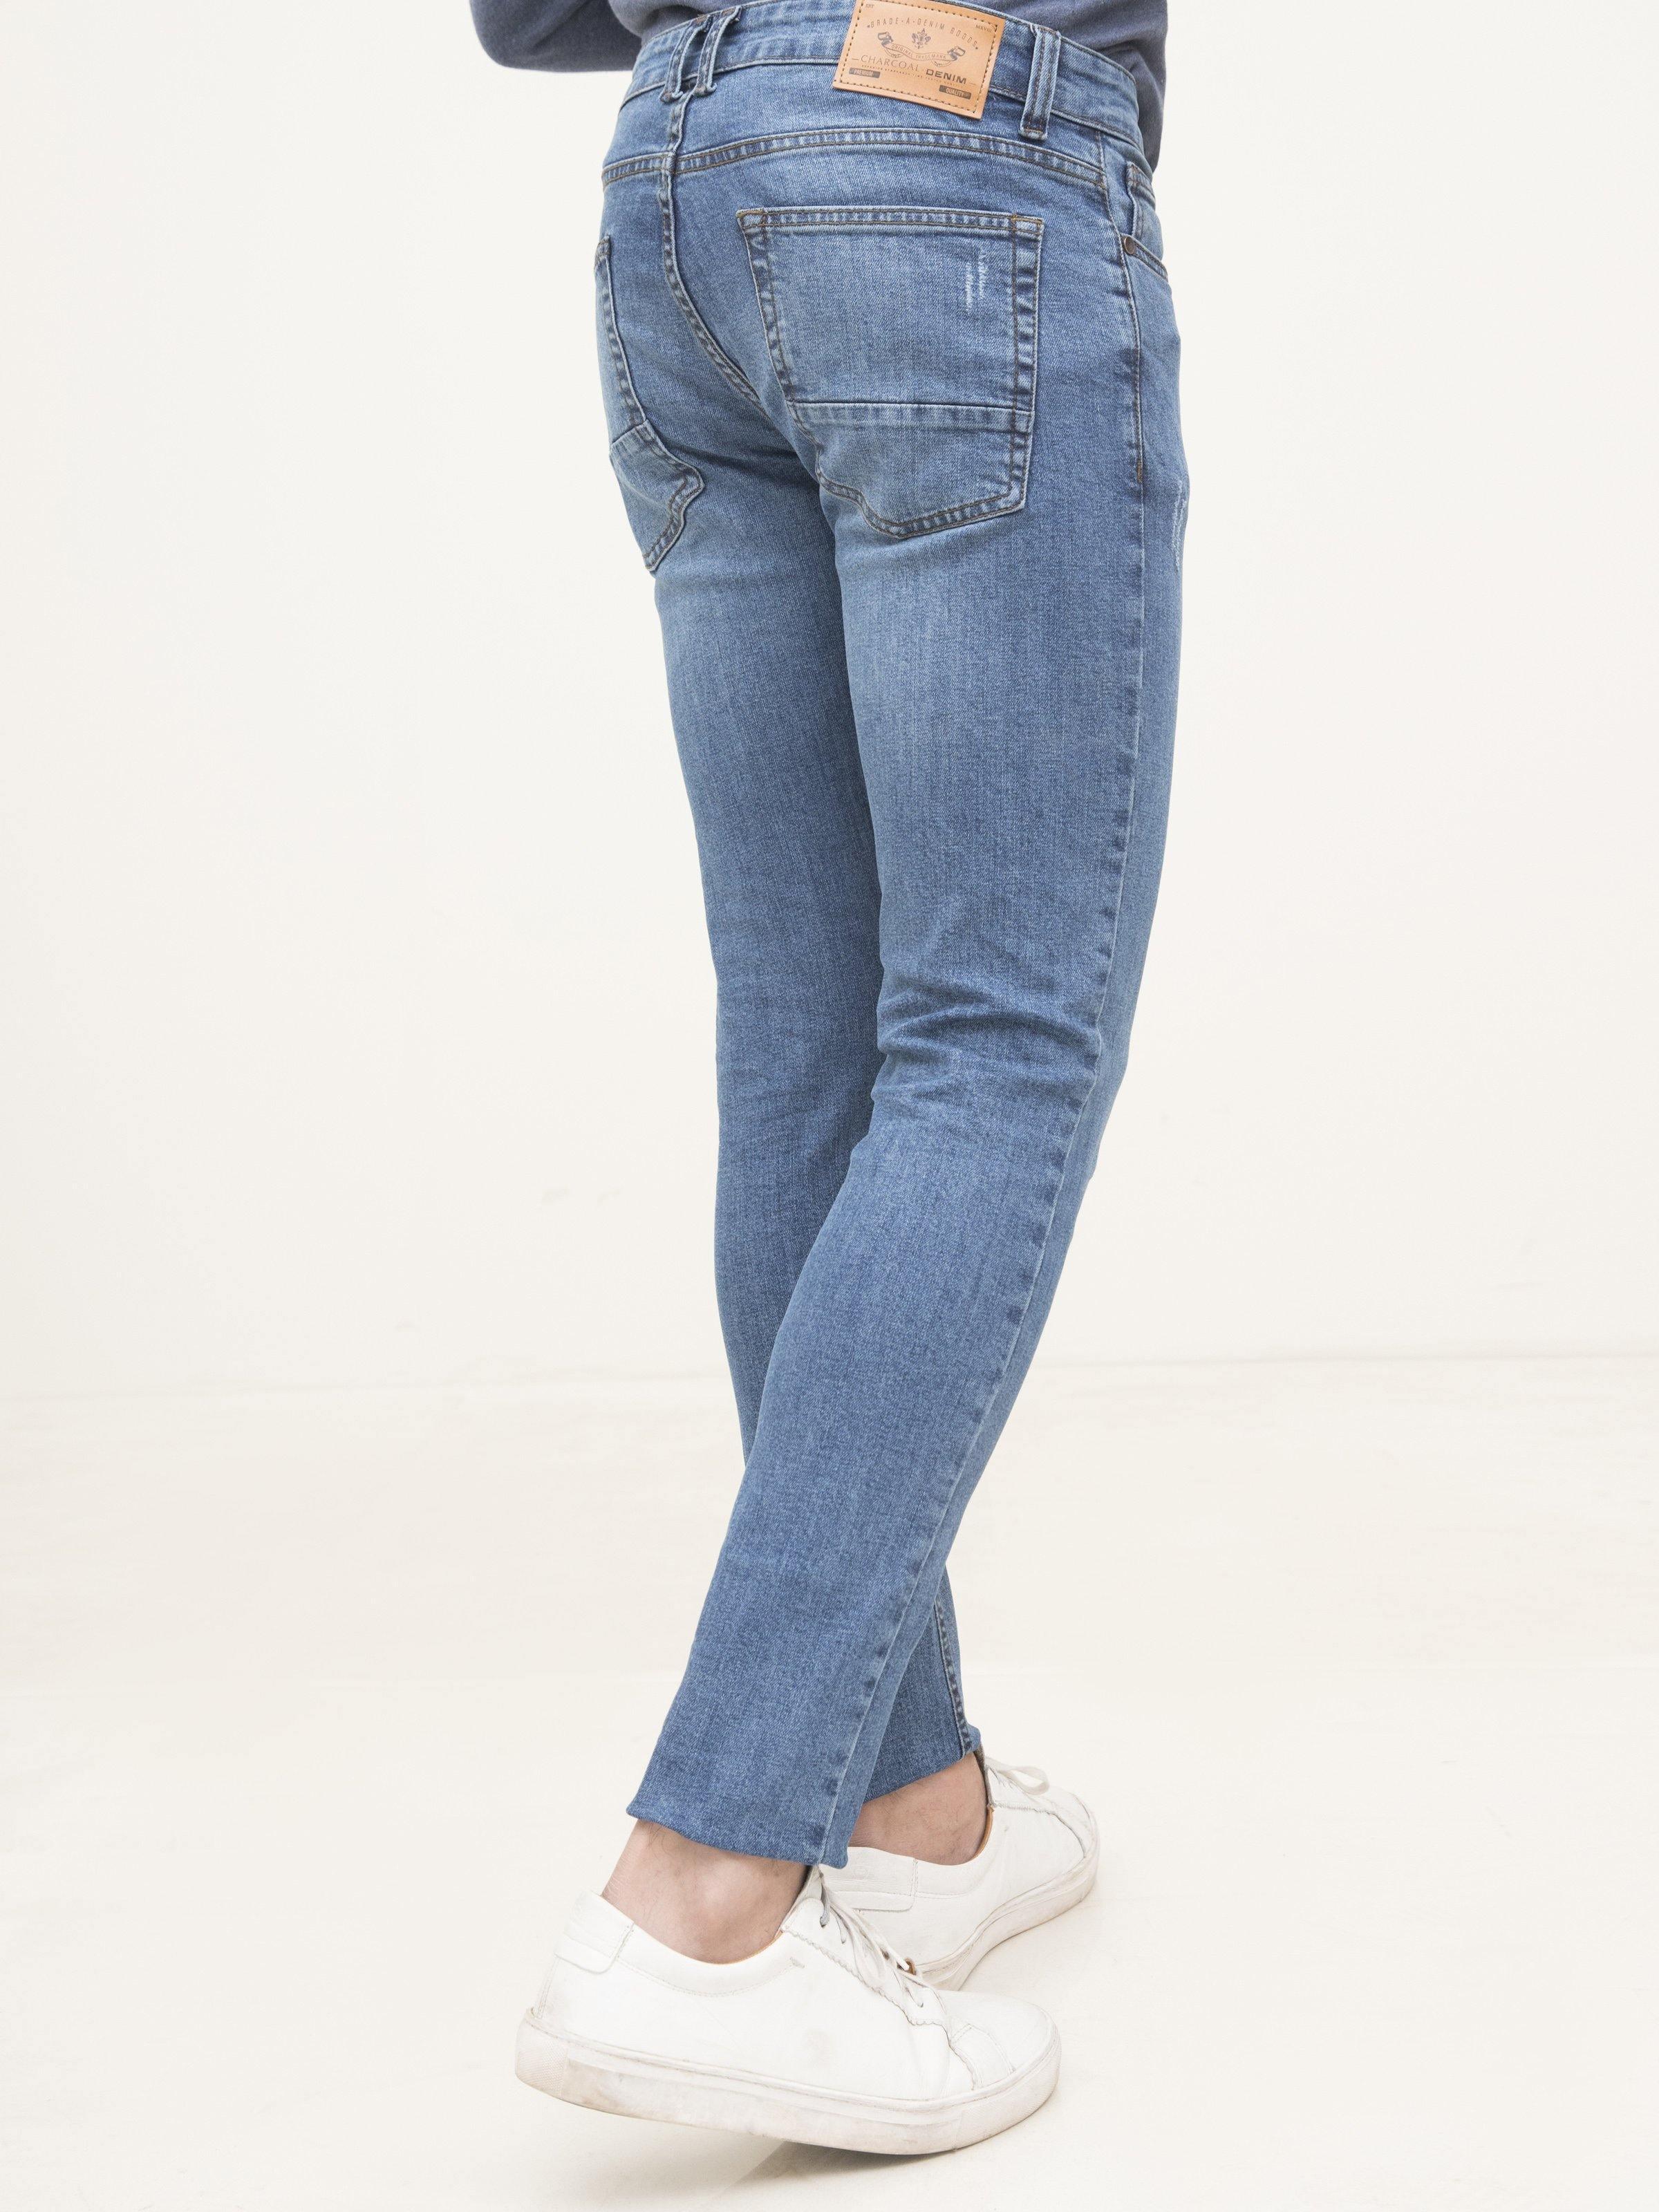 SLIM FIT JEANS LIGHT BLUE at Charcoal Clothing